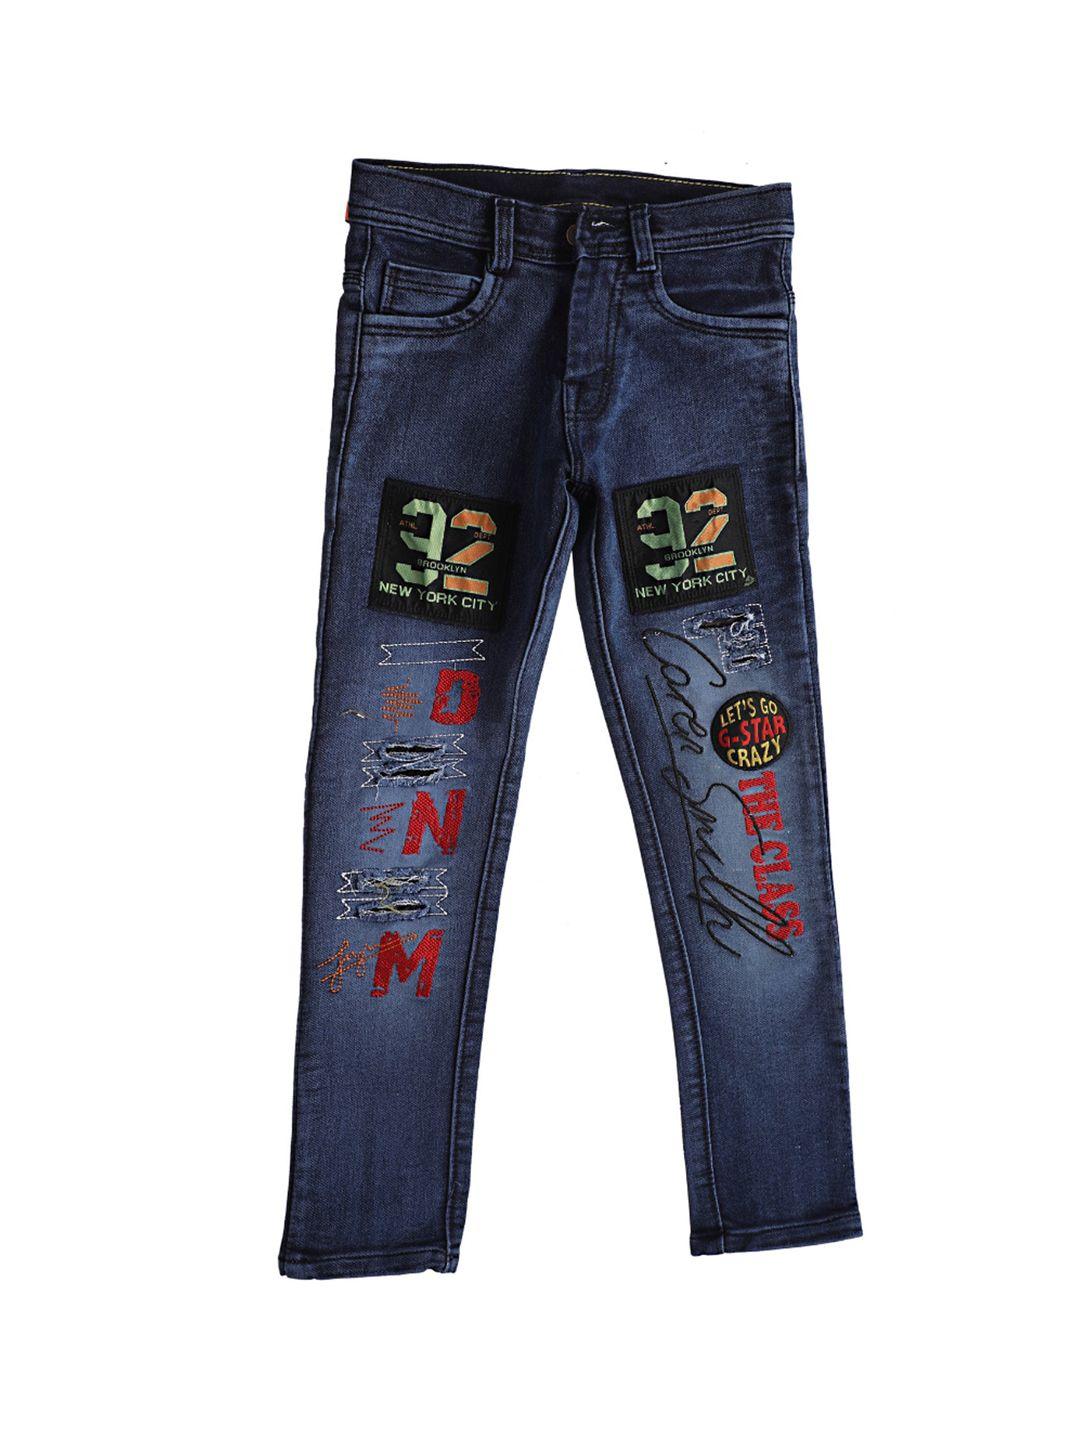 pro-ethic style developer boys blue jean highly distressed light fade stretchable jeans